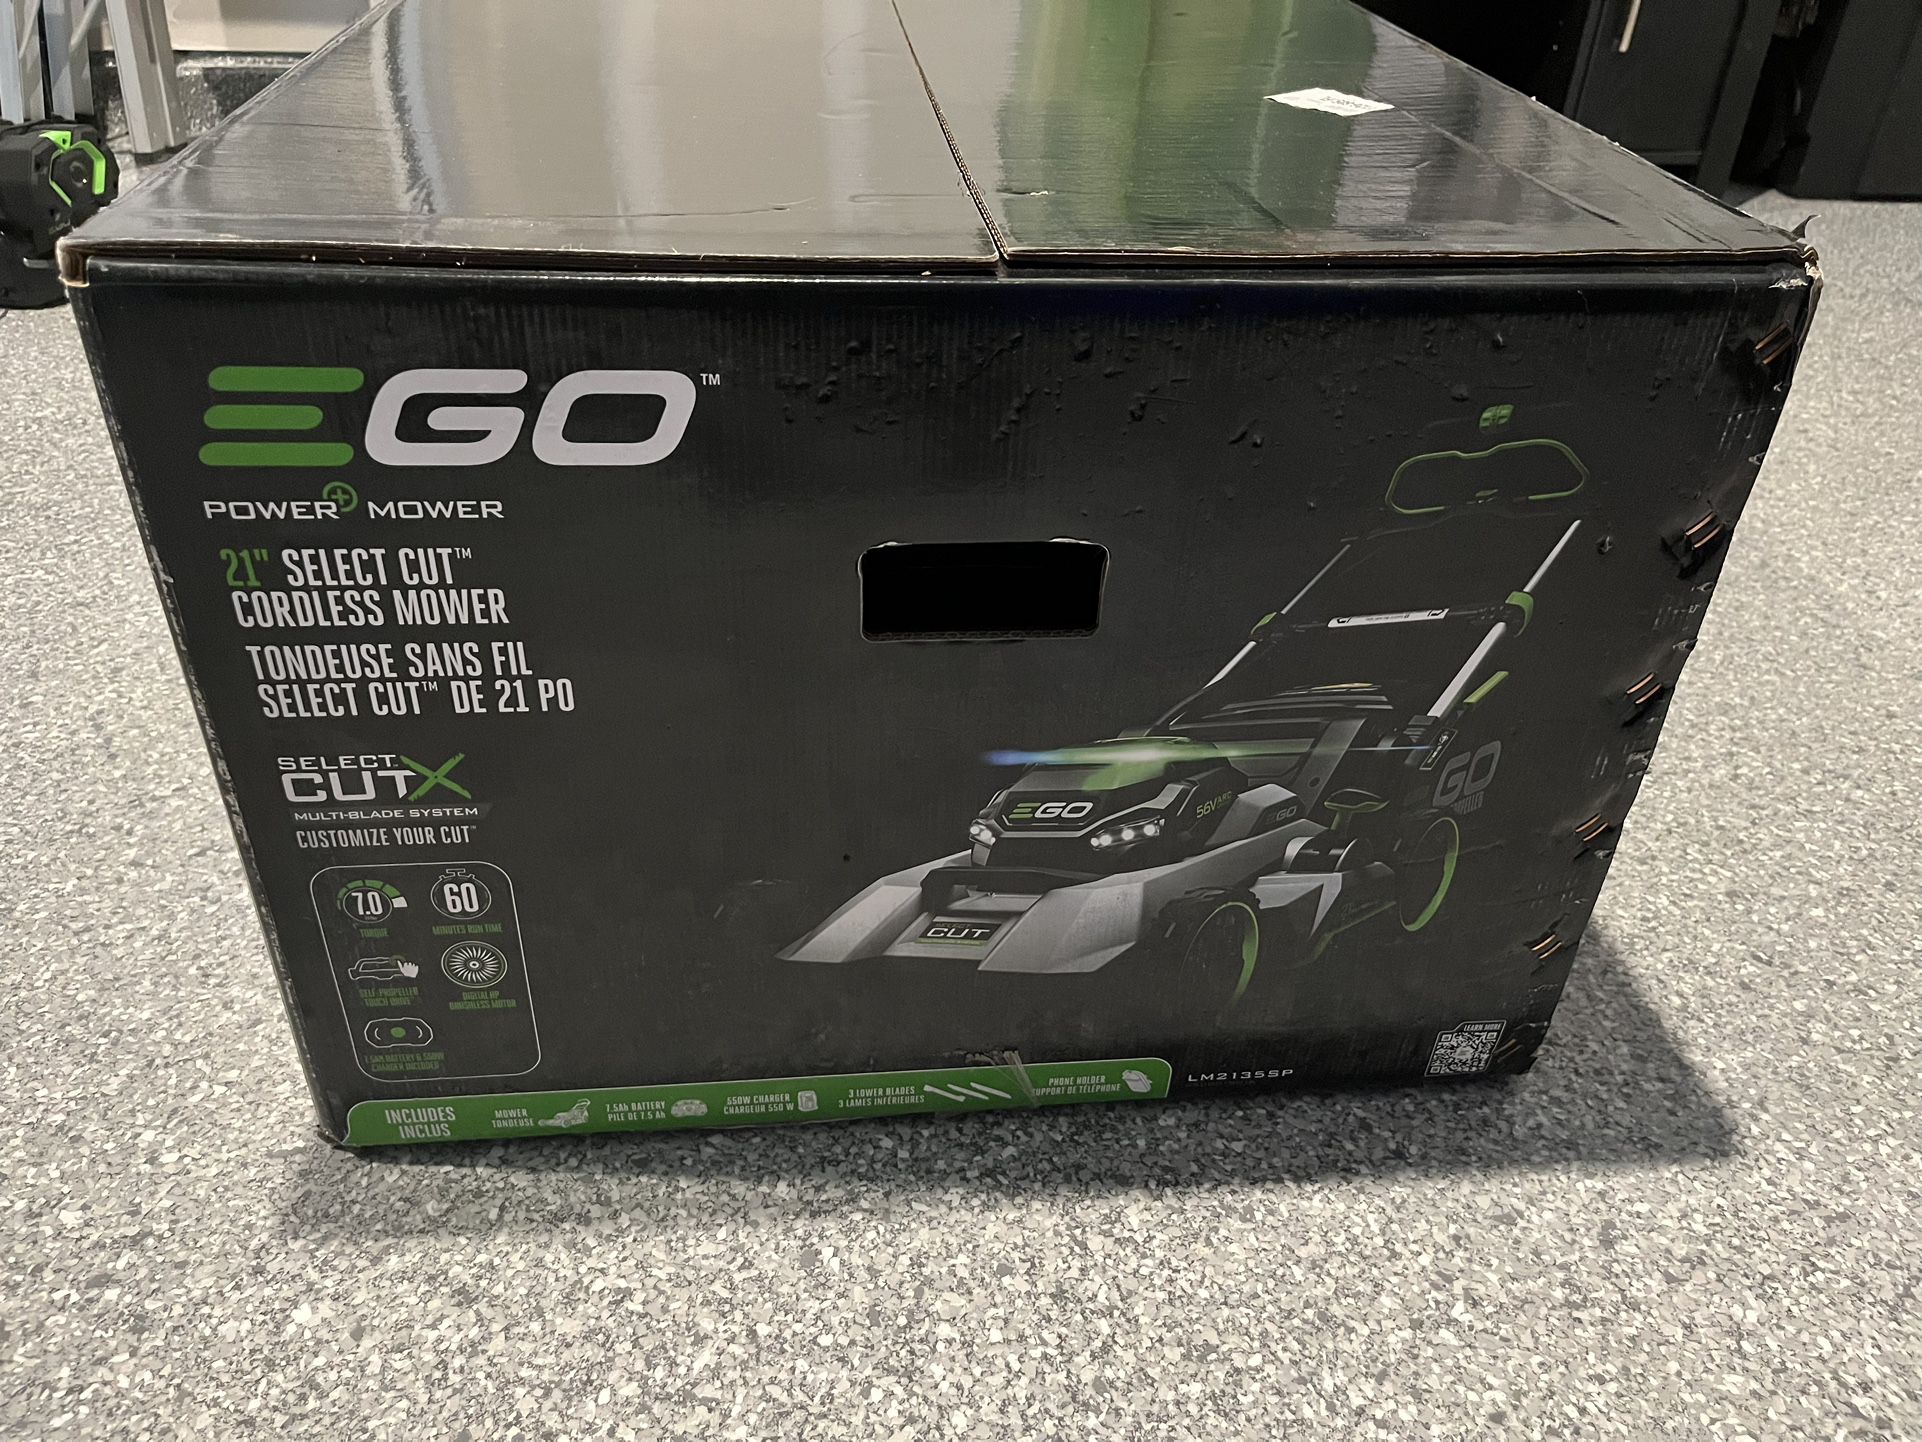 BRAND NEW UNOPENED Ego 21” Select Cut Cordless Mower